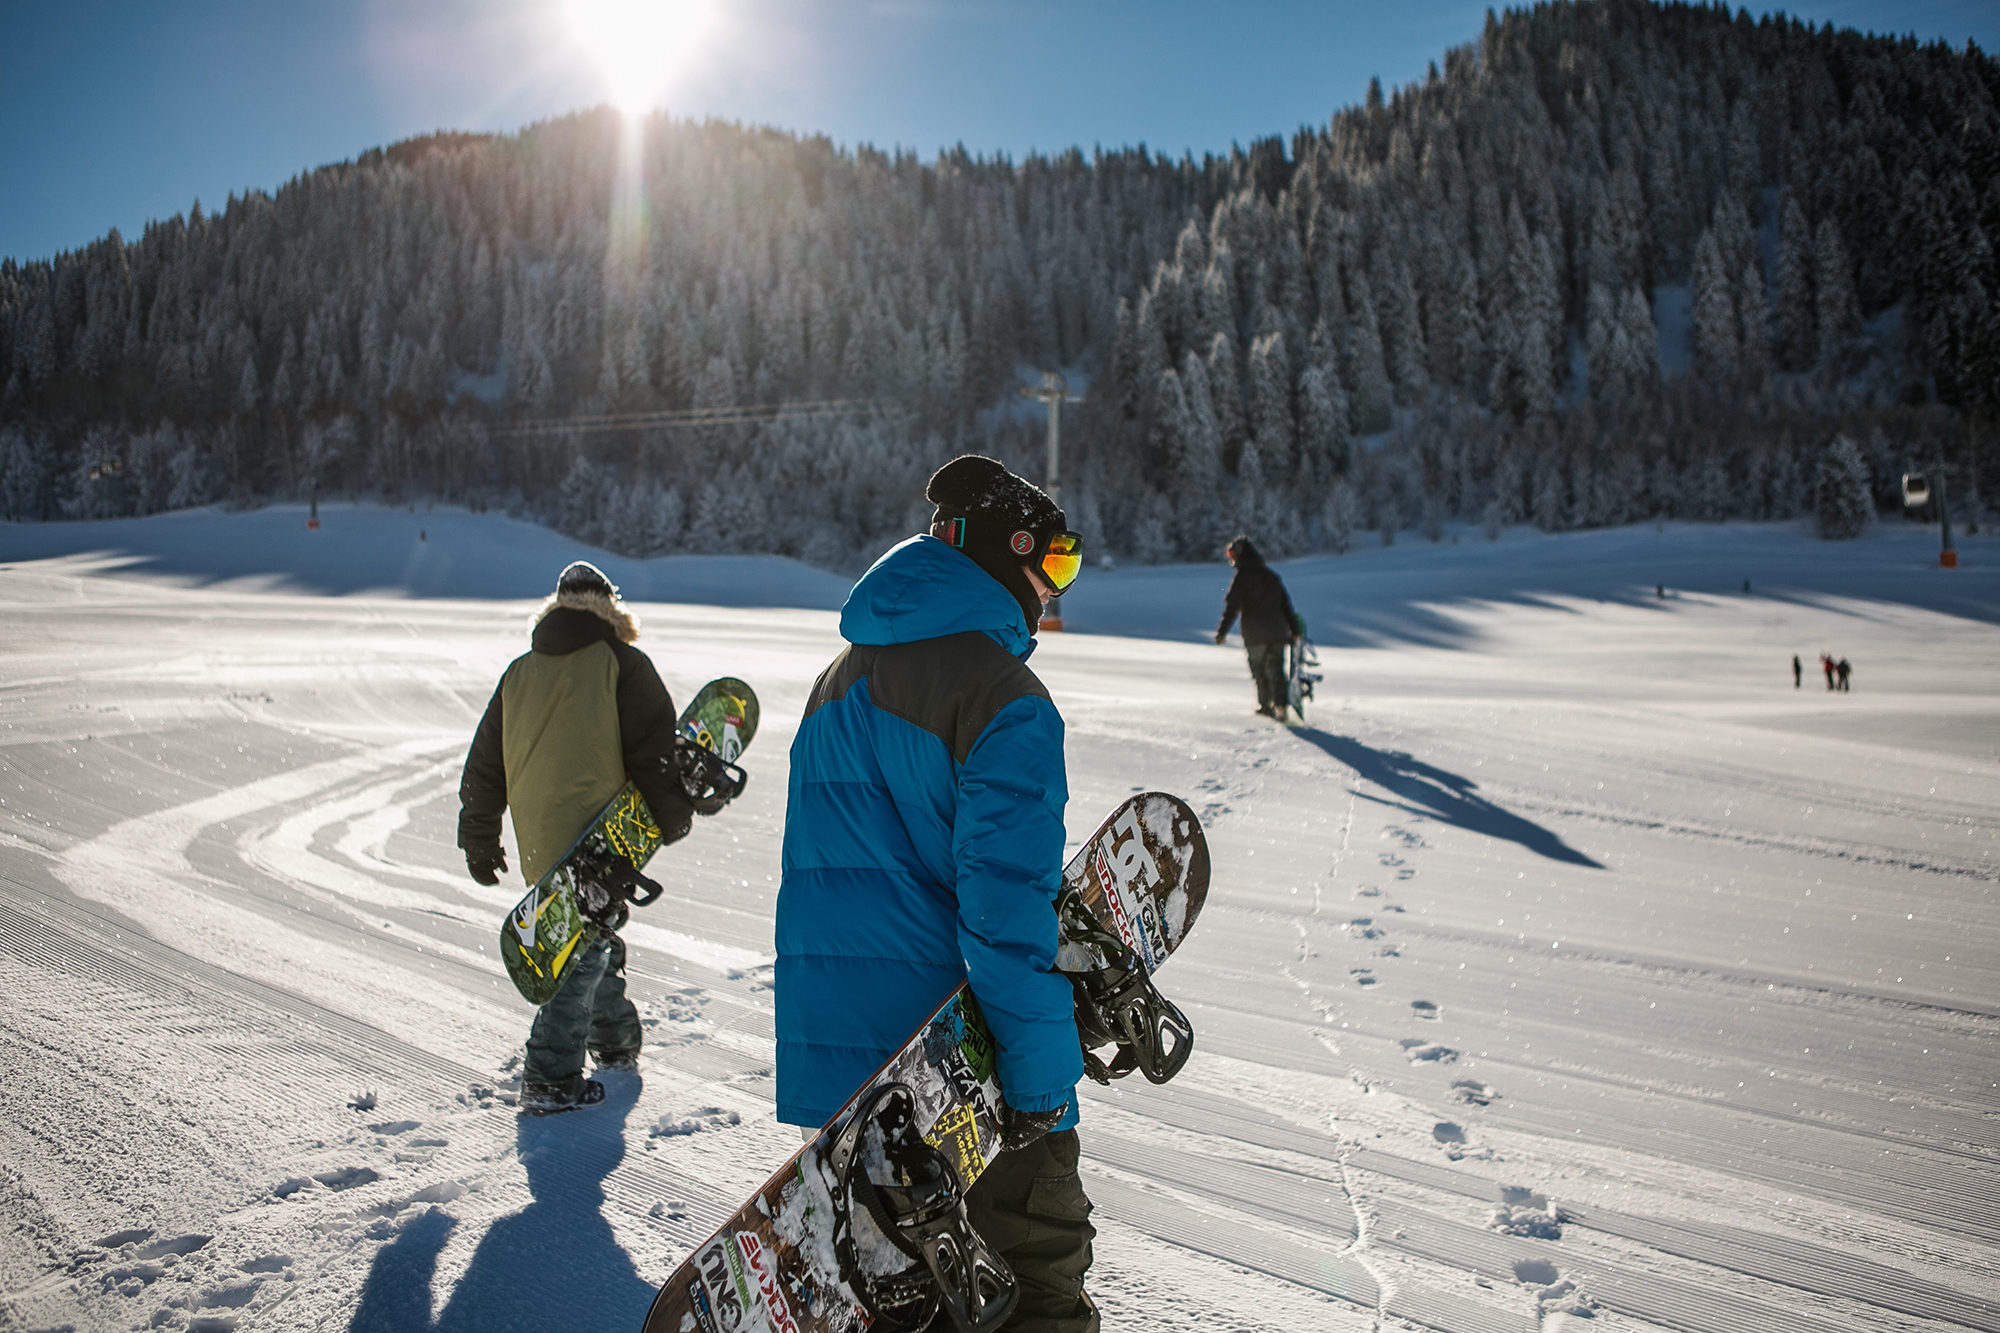 three people with snowboards walking on a snowy moutain